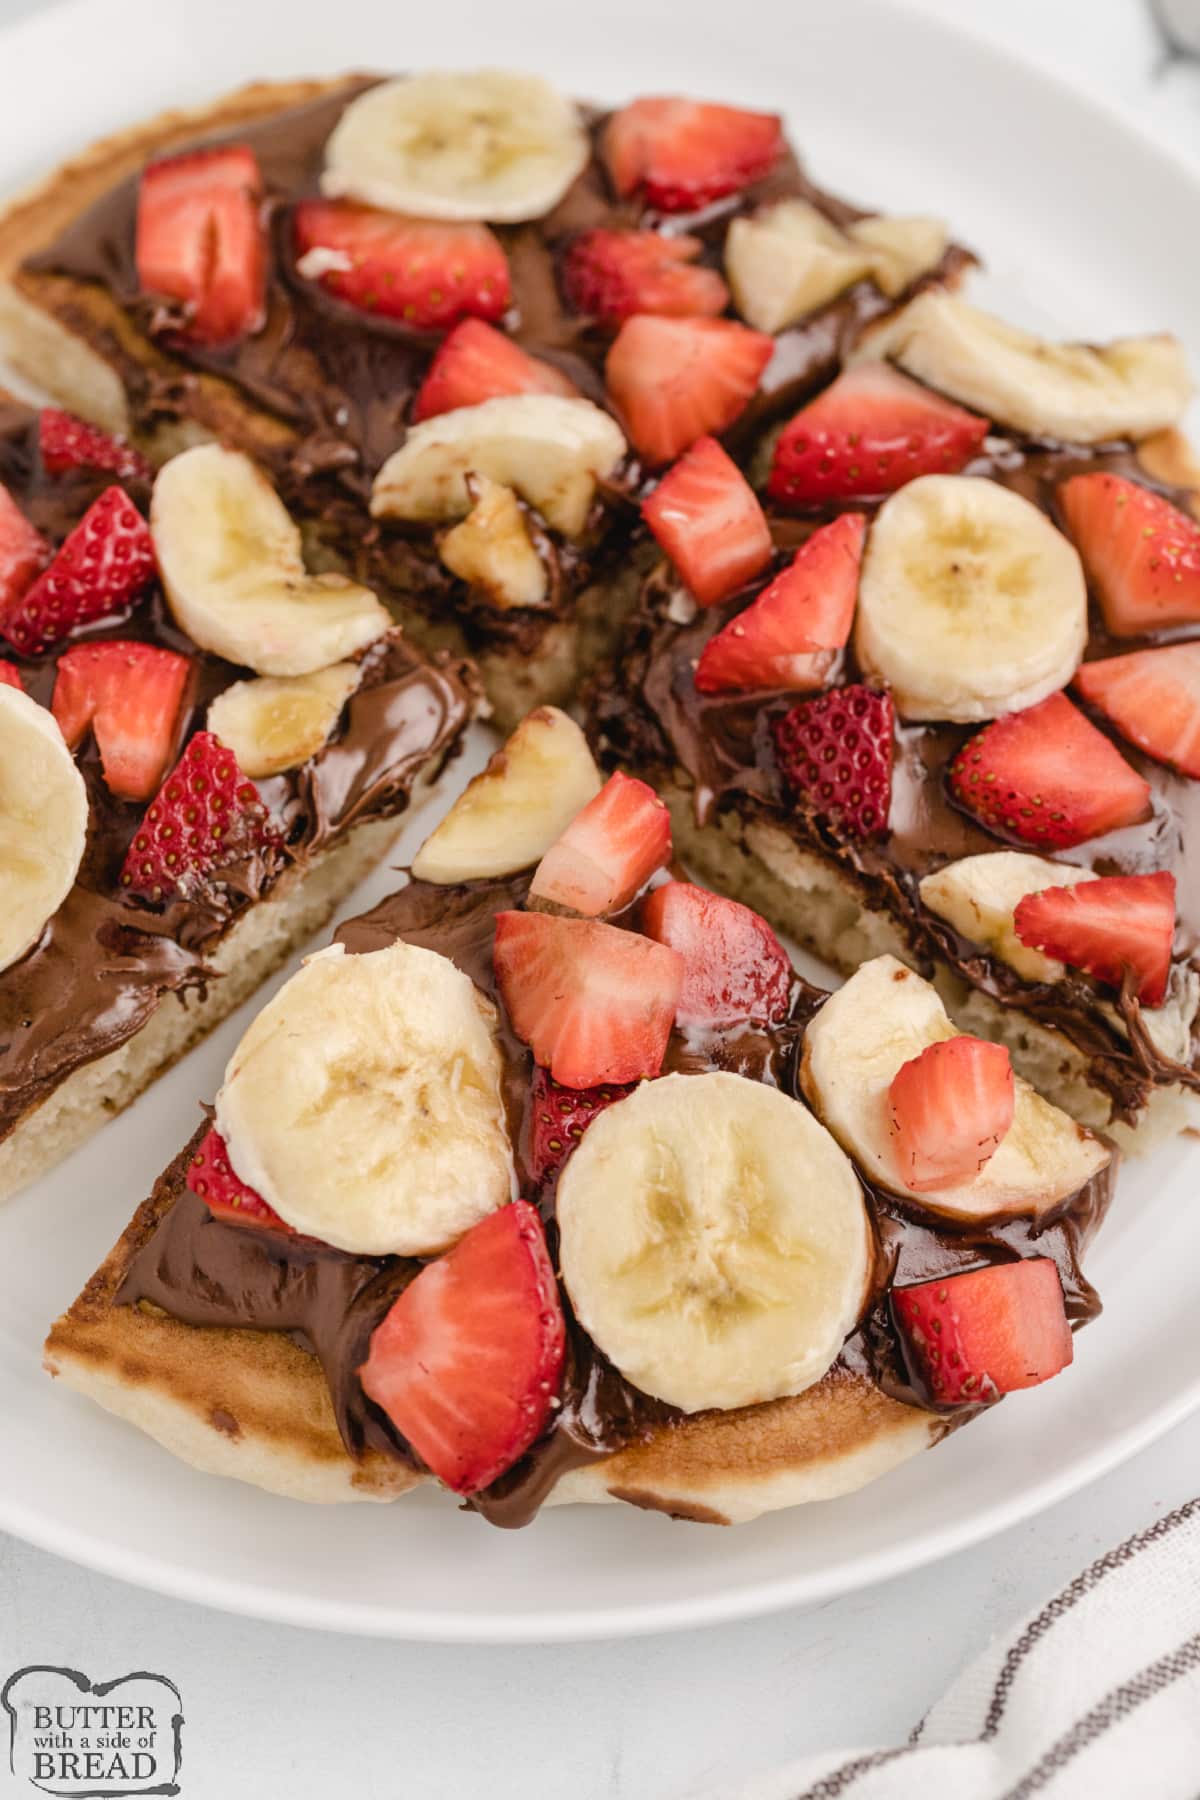 Pancake topped with nutella, strawberries and bananas